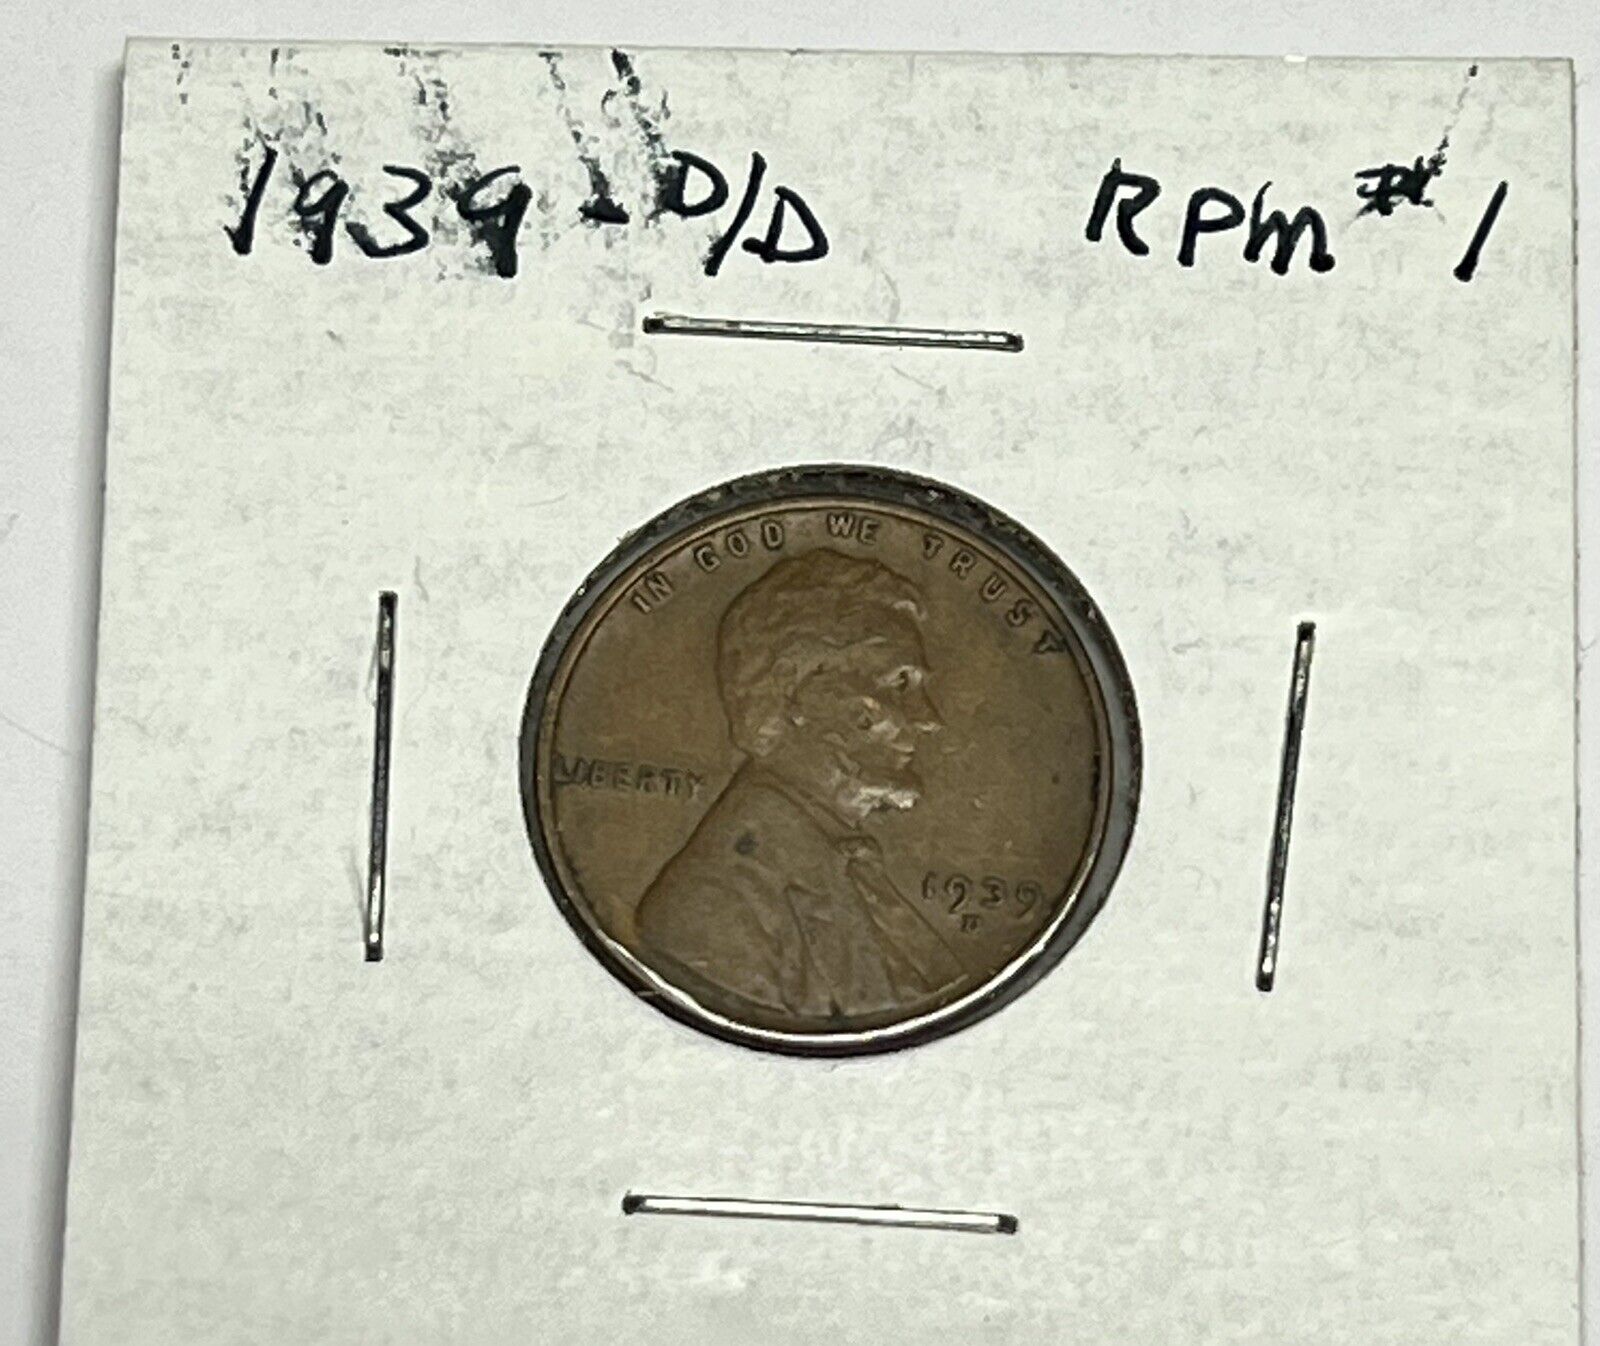 Penny with the re-punched mint mark